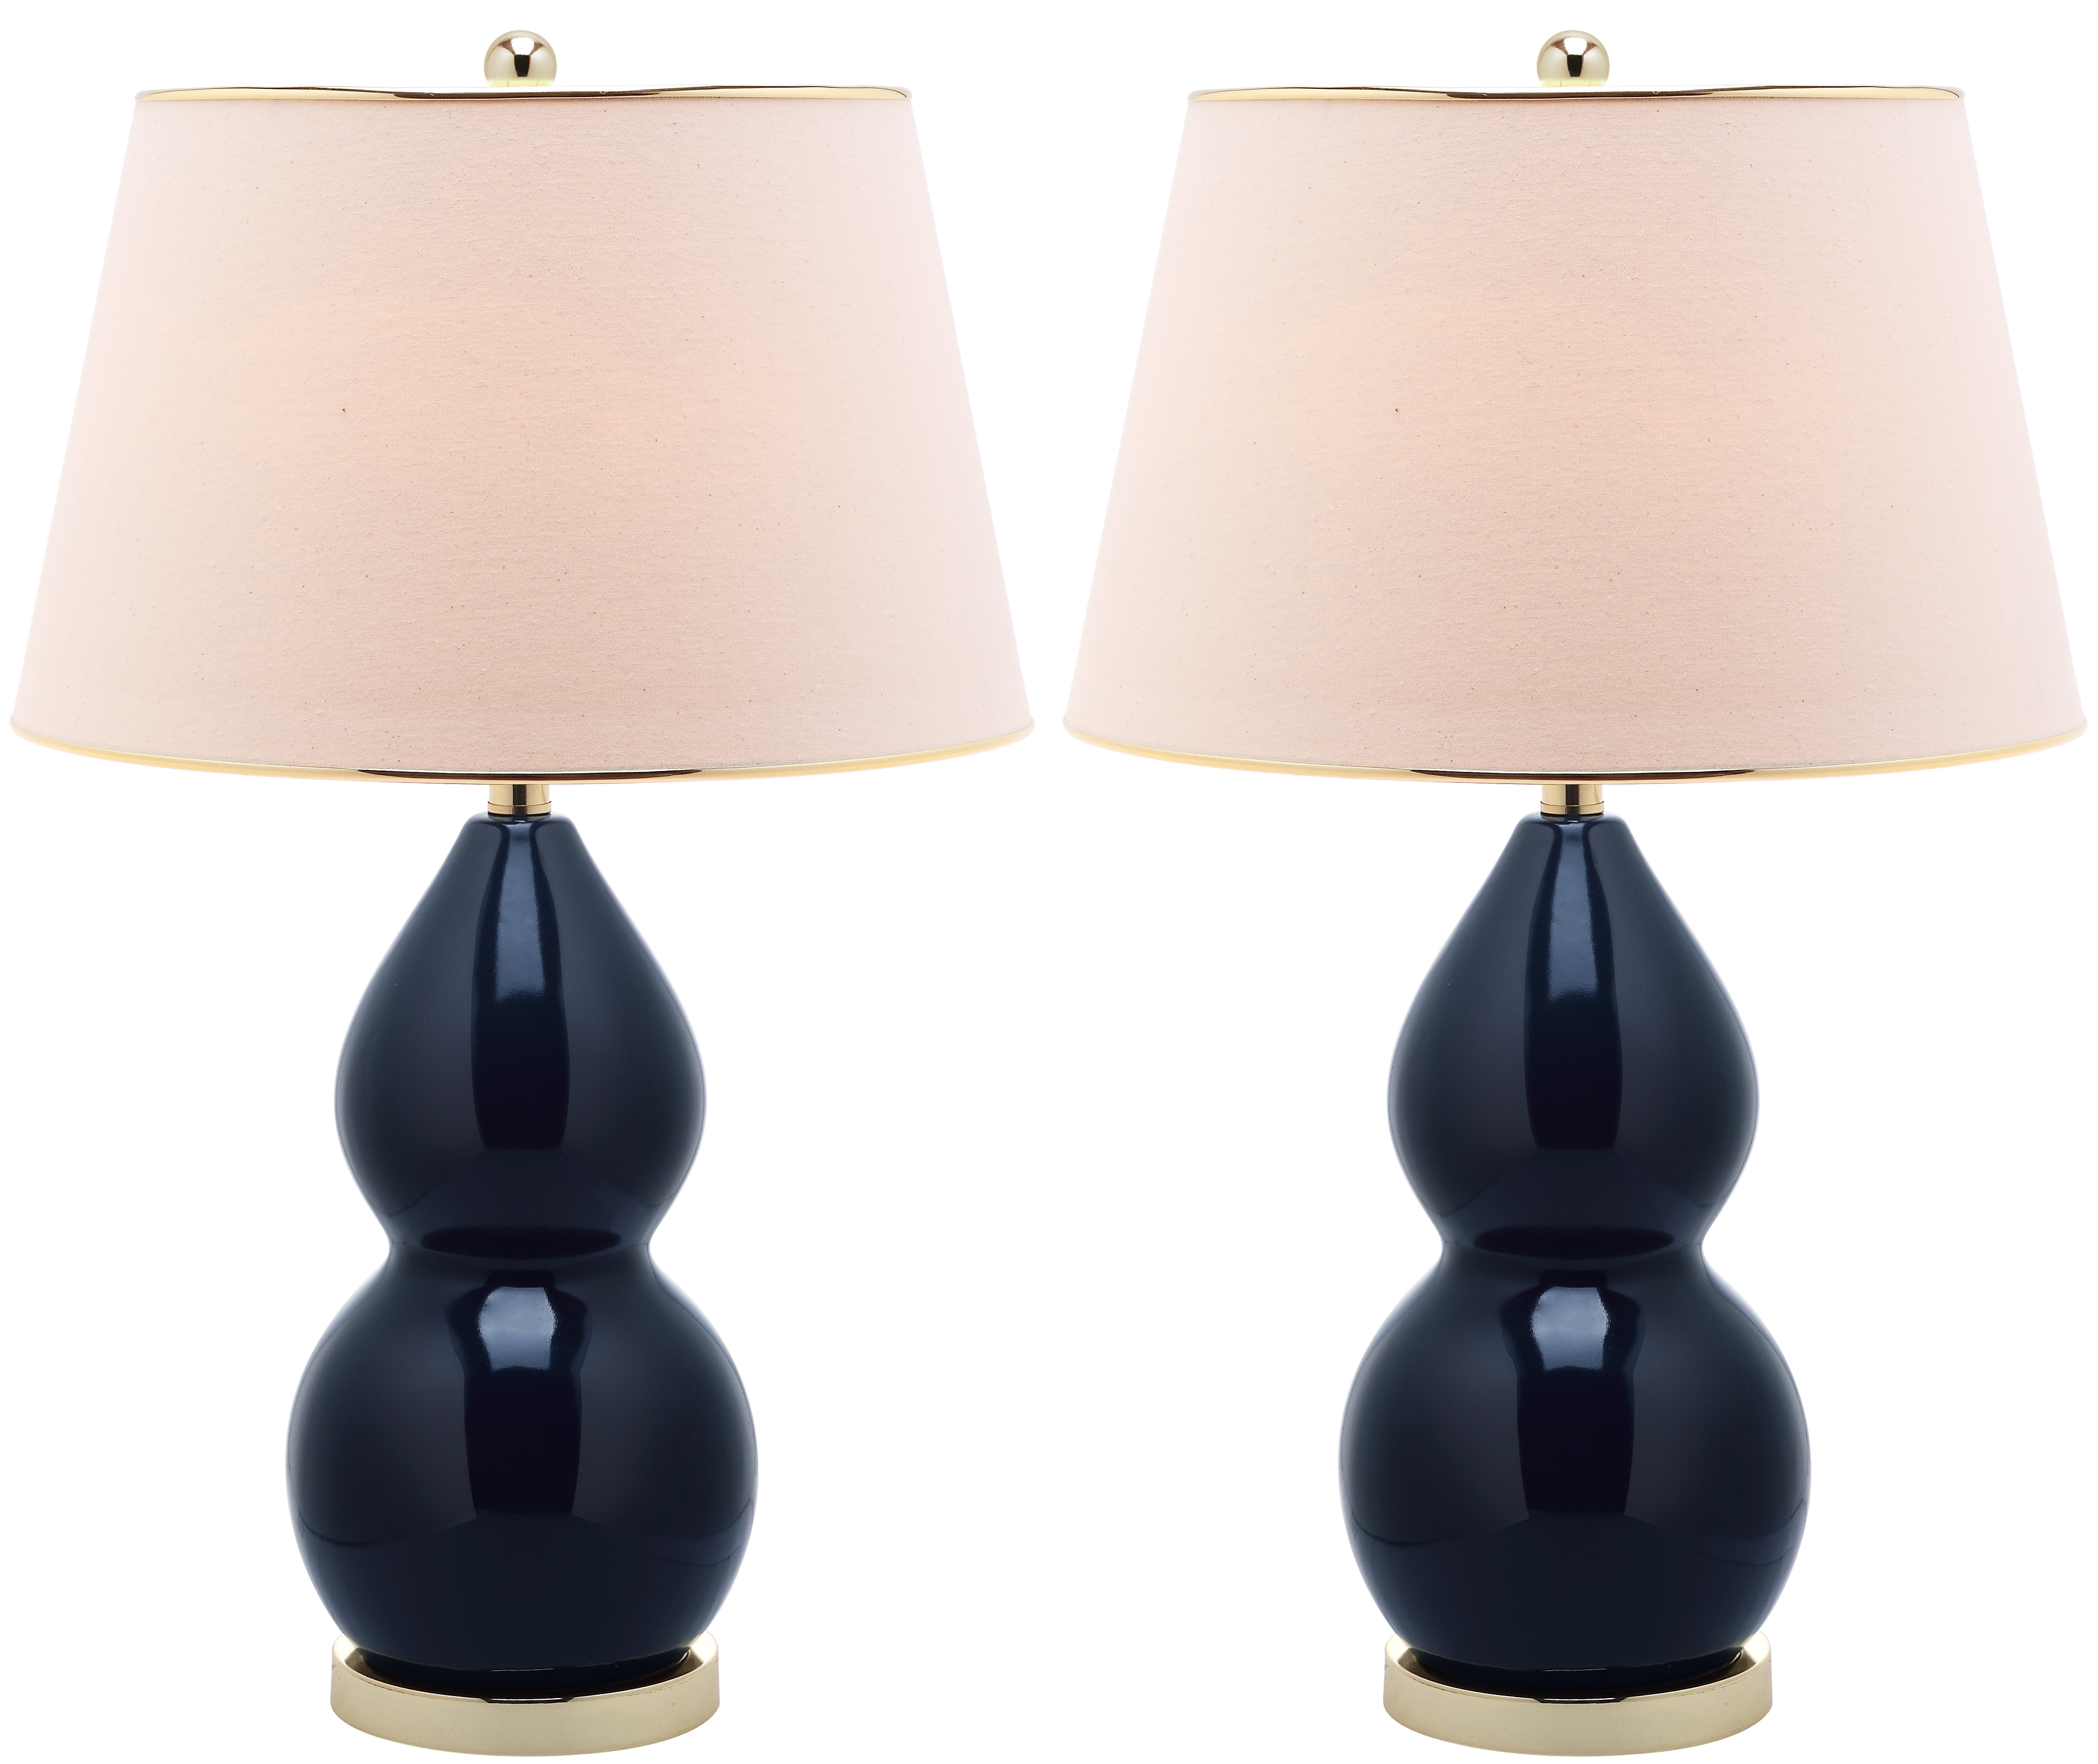 Jill 26.5-Inch H Double- Gourd Ceramic Table Lamp - Navy - Arlo Home - Image 1